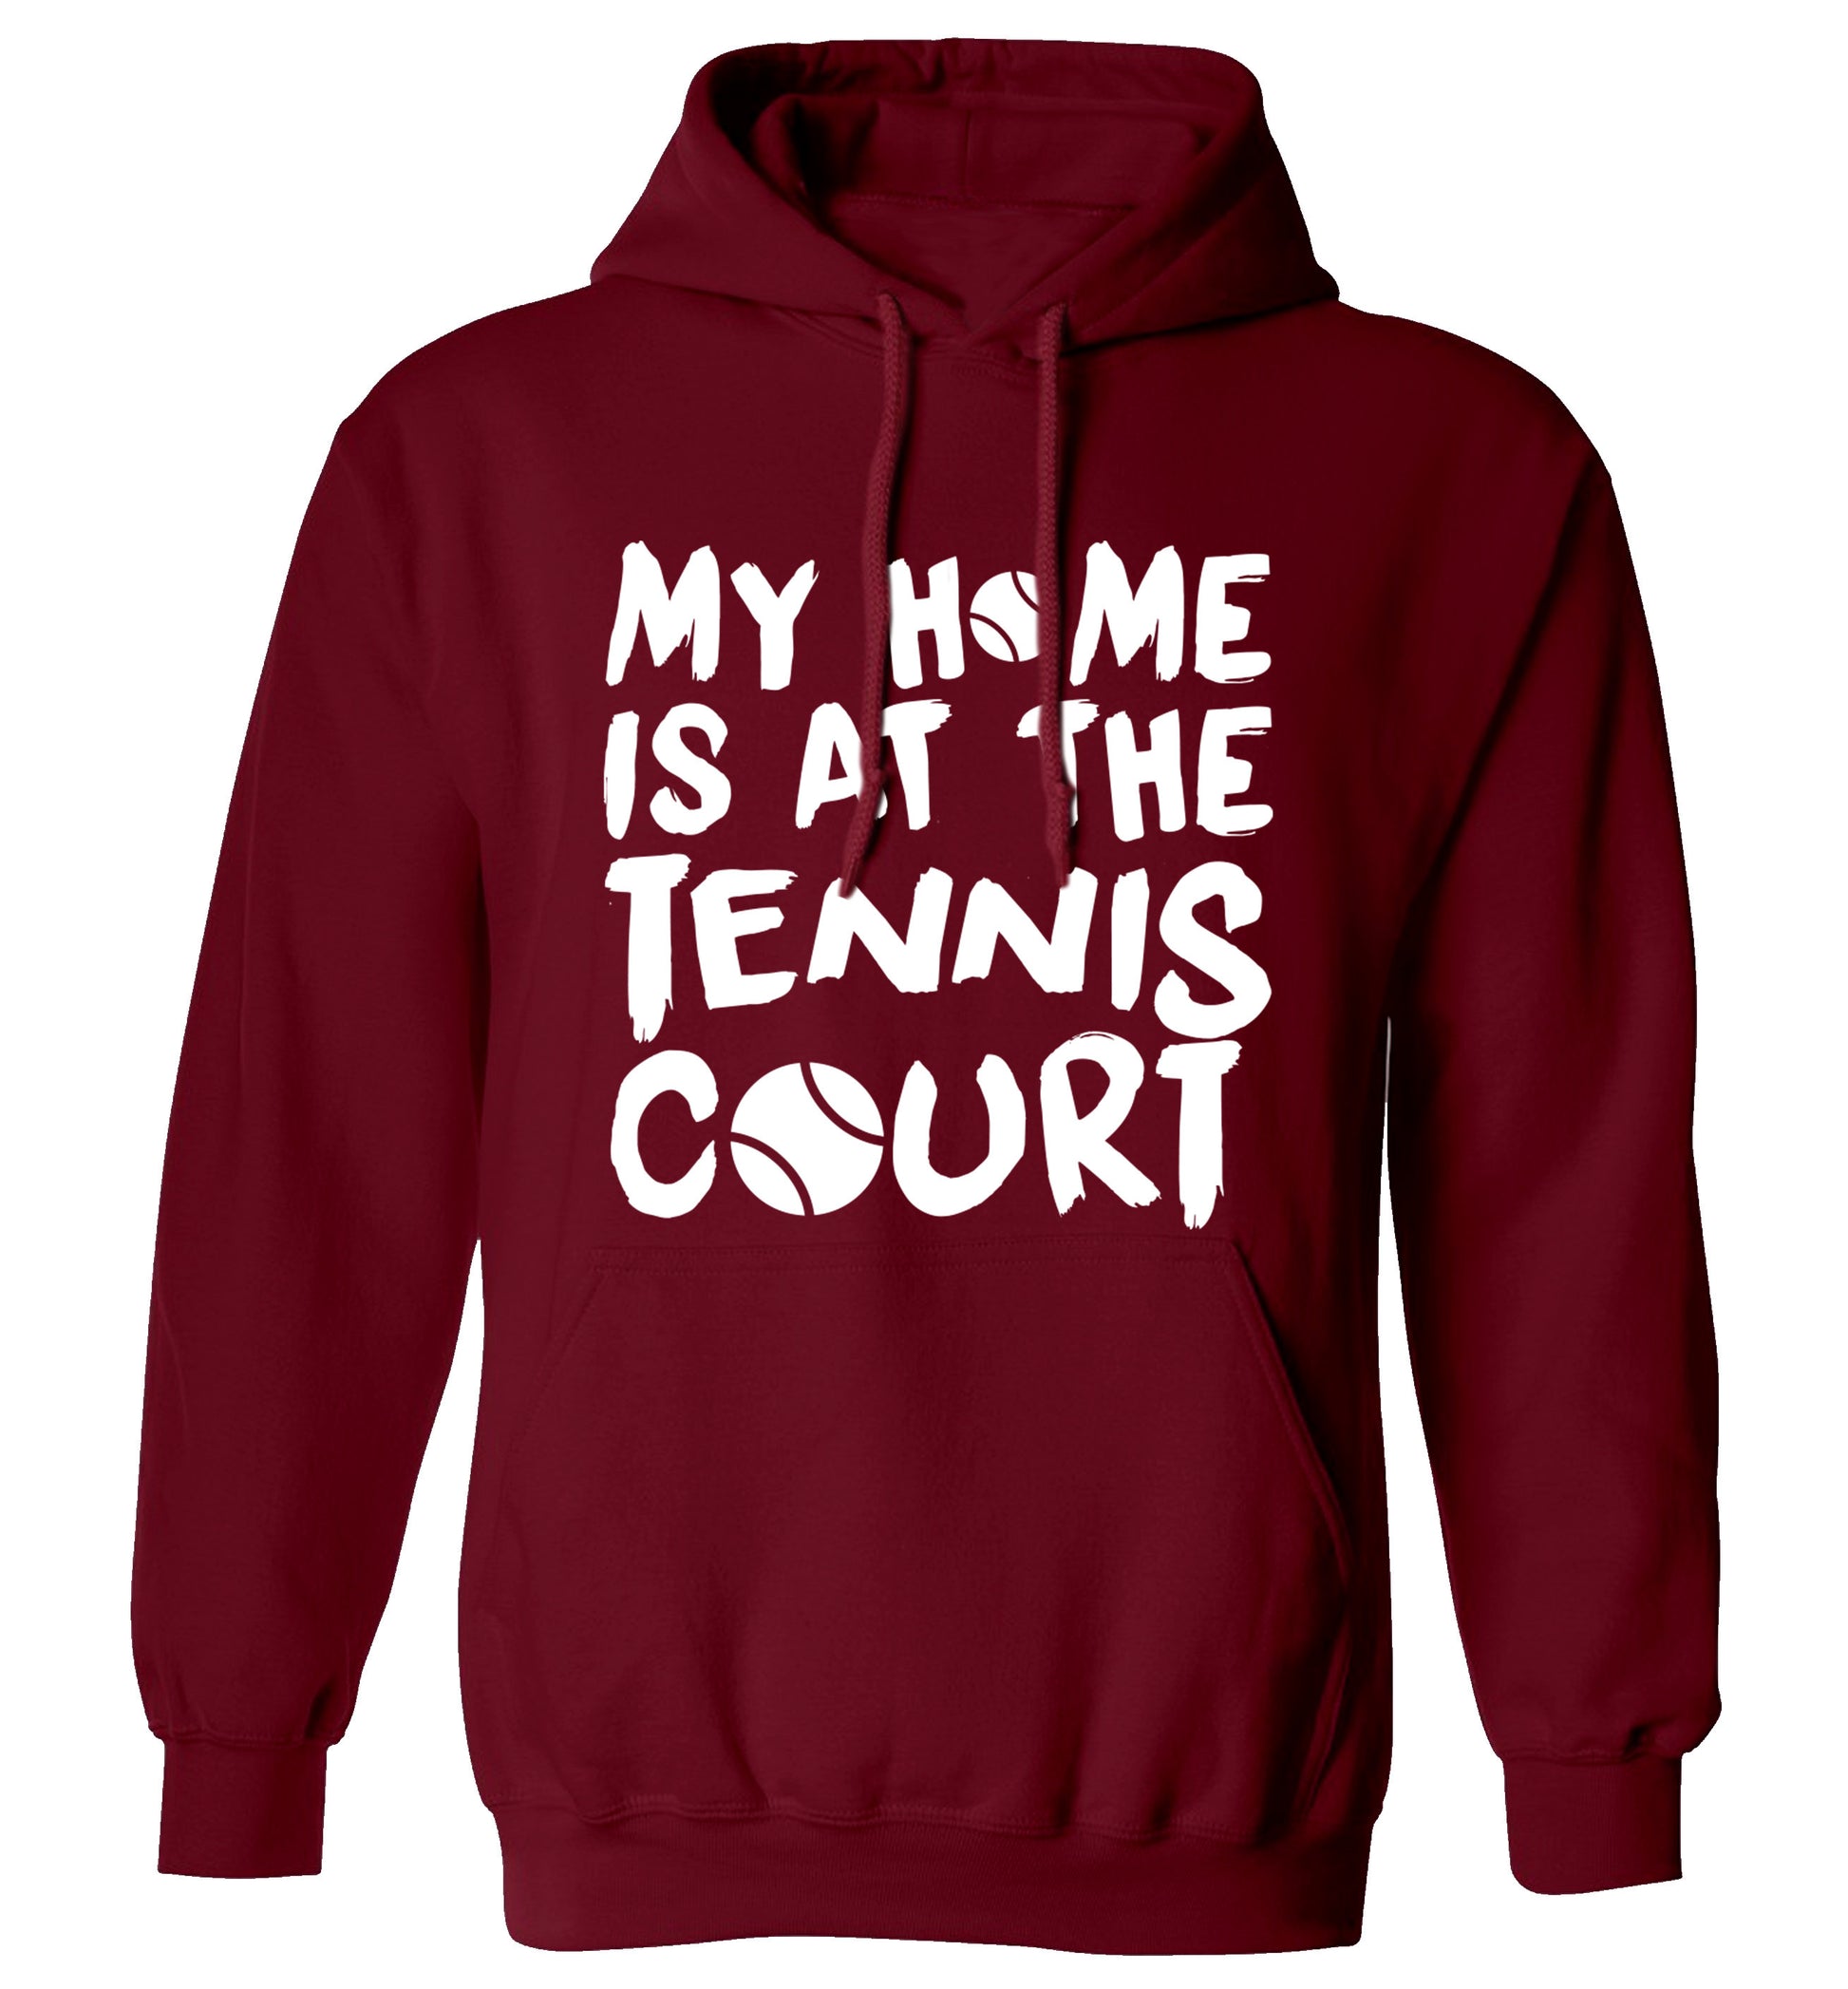 My home is at the tennis court adults unisex maroon hoodie 2XL